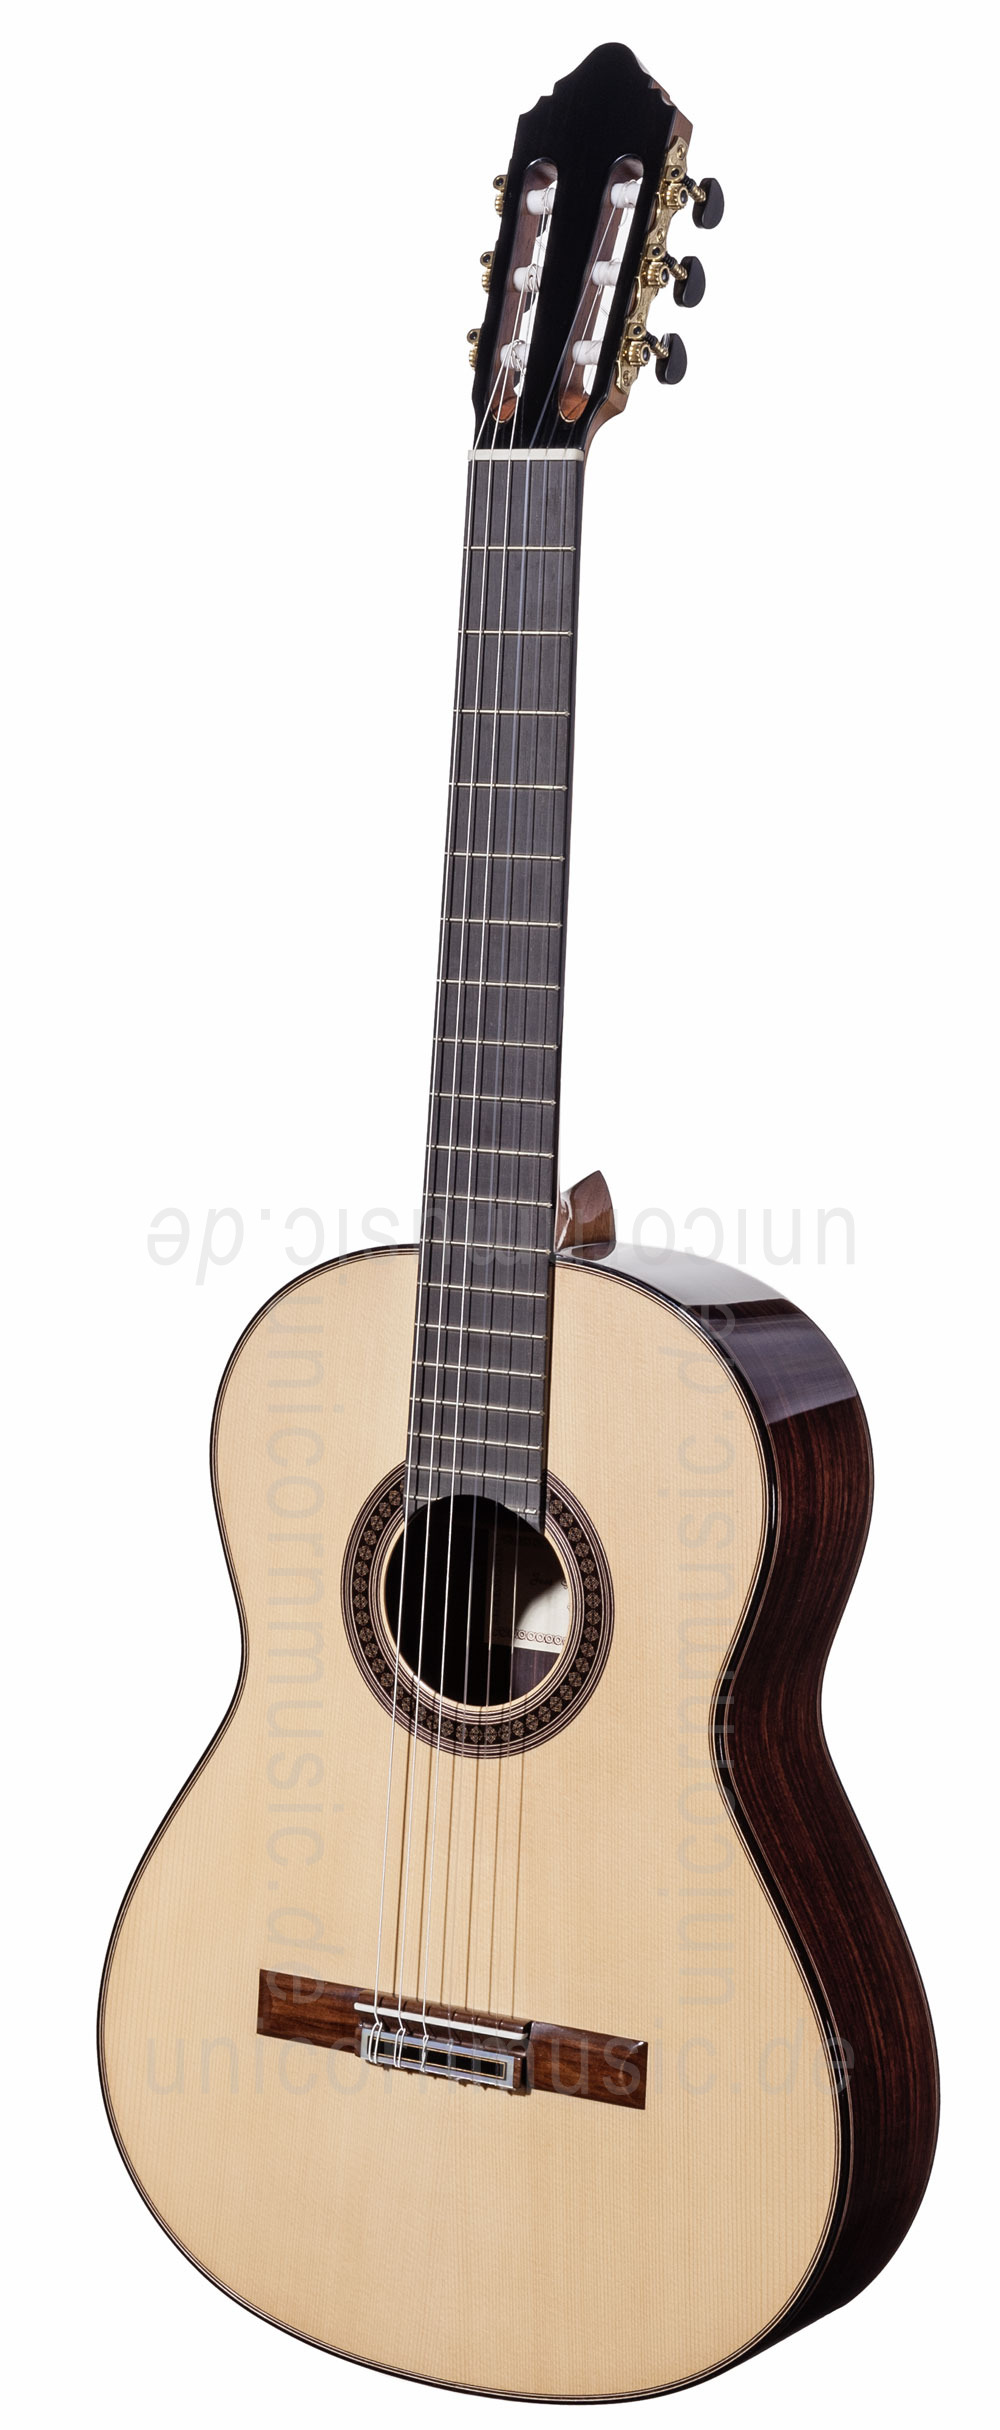 to article description / price Spanish Classical Master Guitar JOSE GONZALEZ LOPEZ spruce - all solid - spruce top  + case